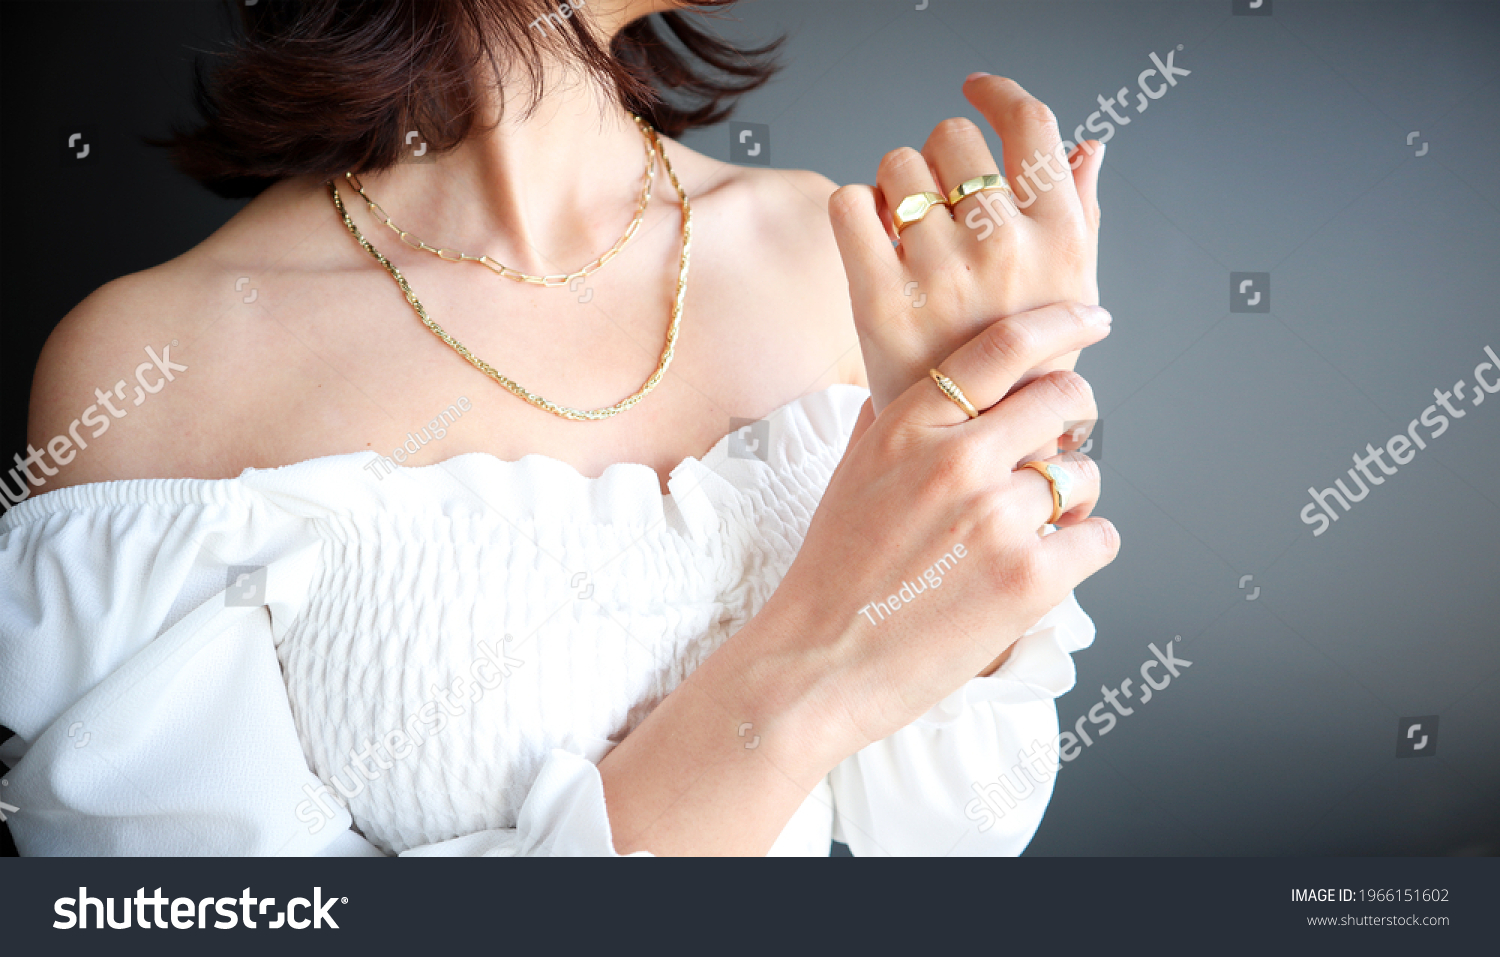 Woman Jewelery concept. Woman’s hands close up wearing rings and necklace modern accessories elegant life style with copy space for text and background.  #1966151602